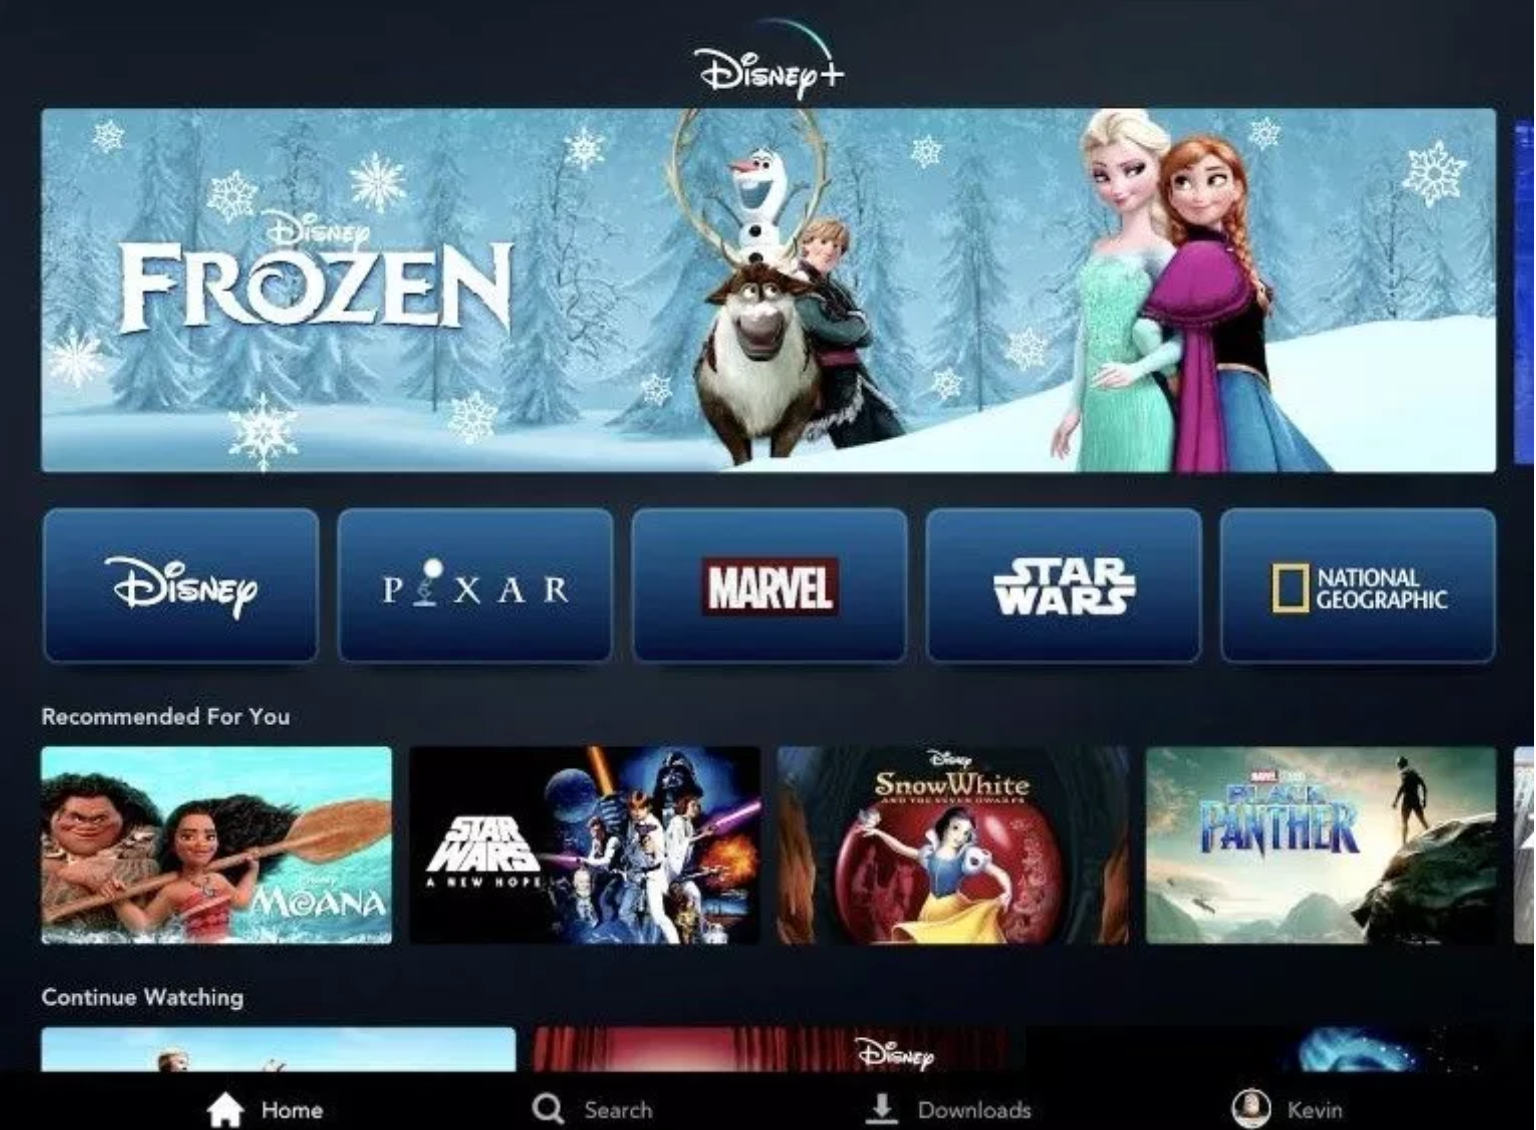 Disney+ Everything To Know Before the November 12th 2019 Launch Date